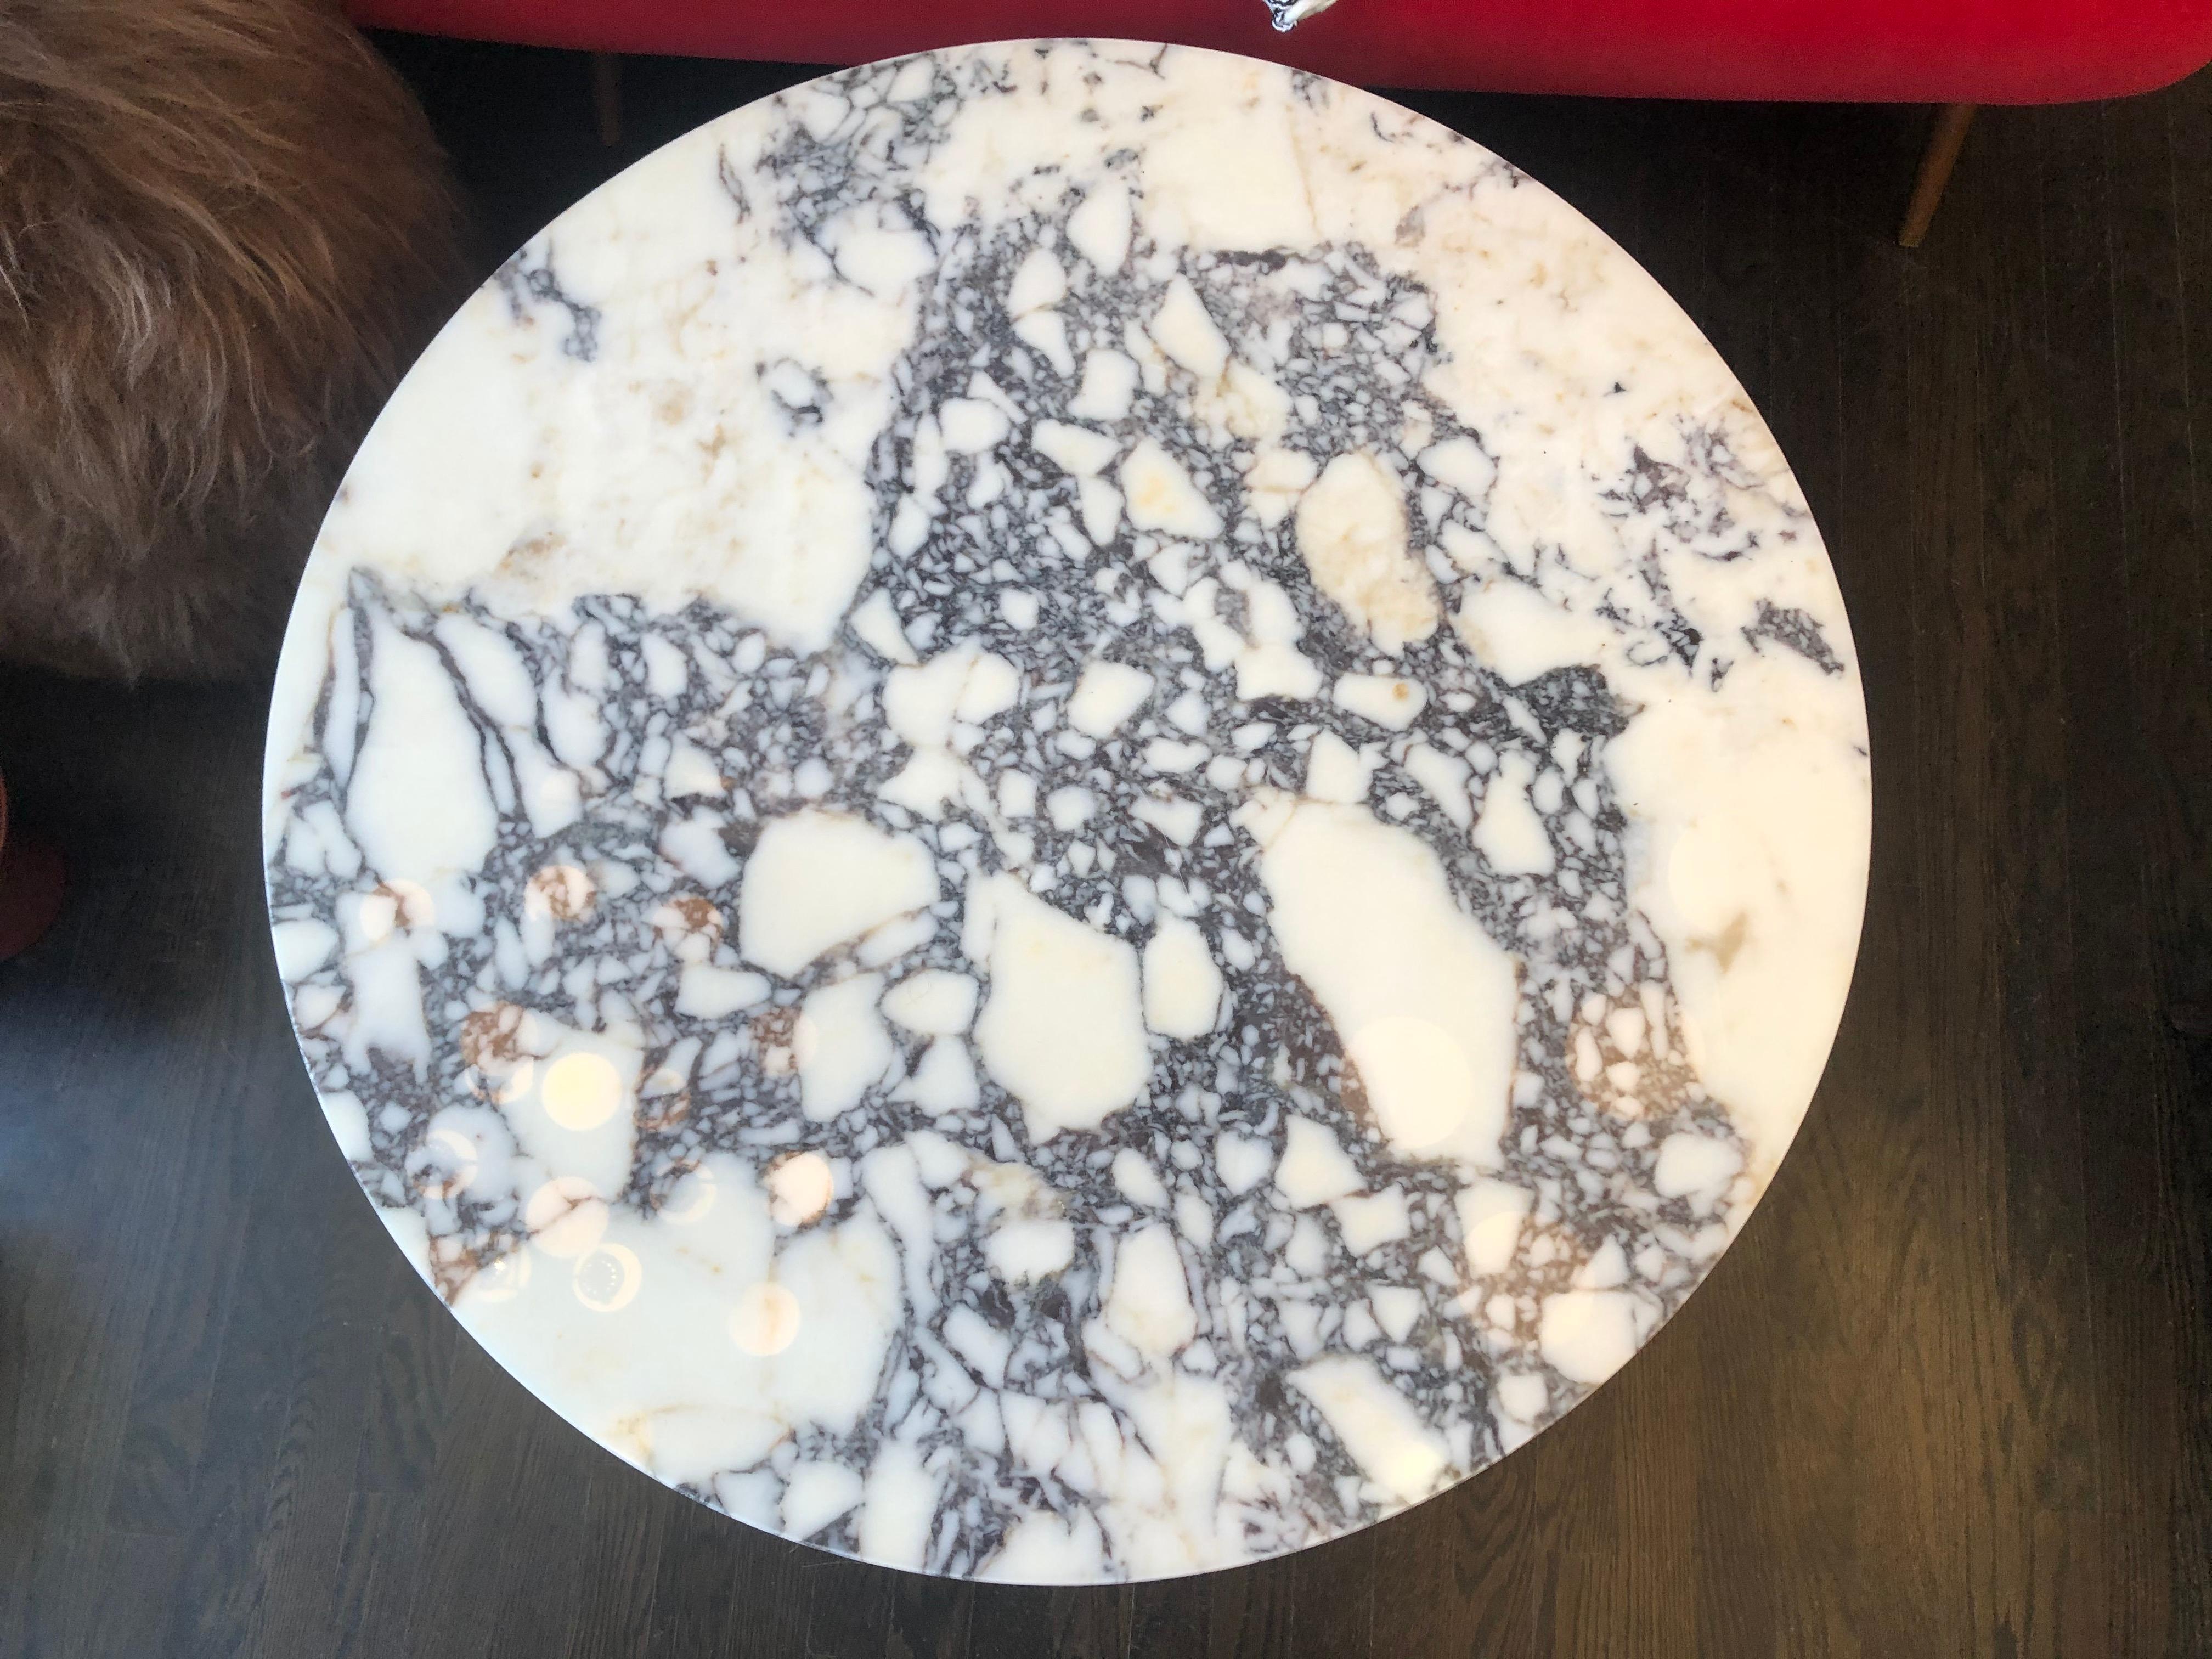 Round Carrara marble coffee table by Le Lampade
Circular Carrara marble top standing on red marble hexagonal base 
The table can be custom made and the lead time is three weeks.